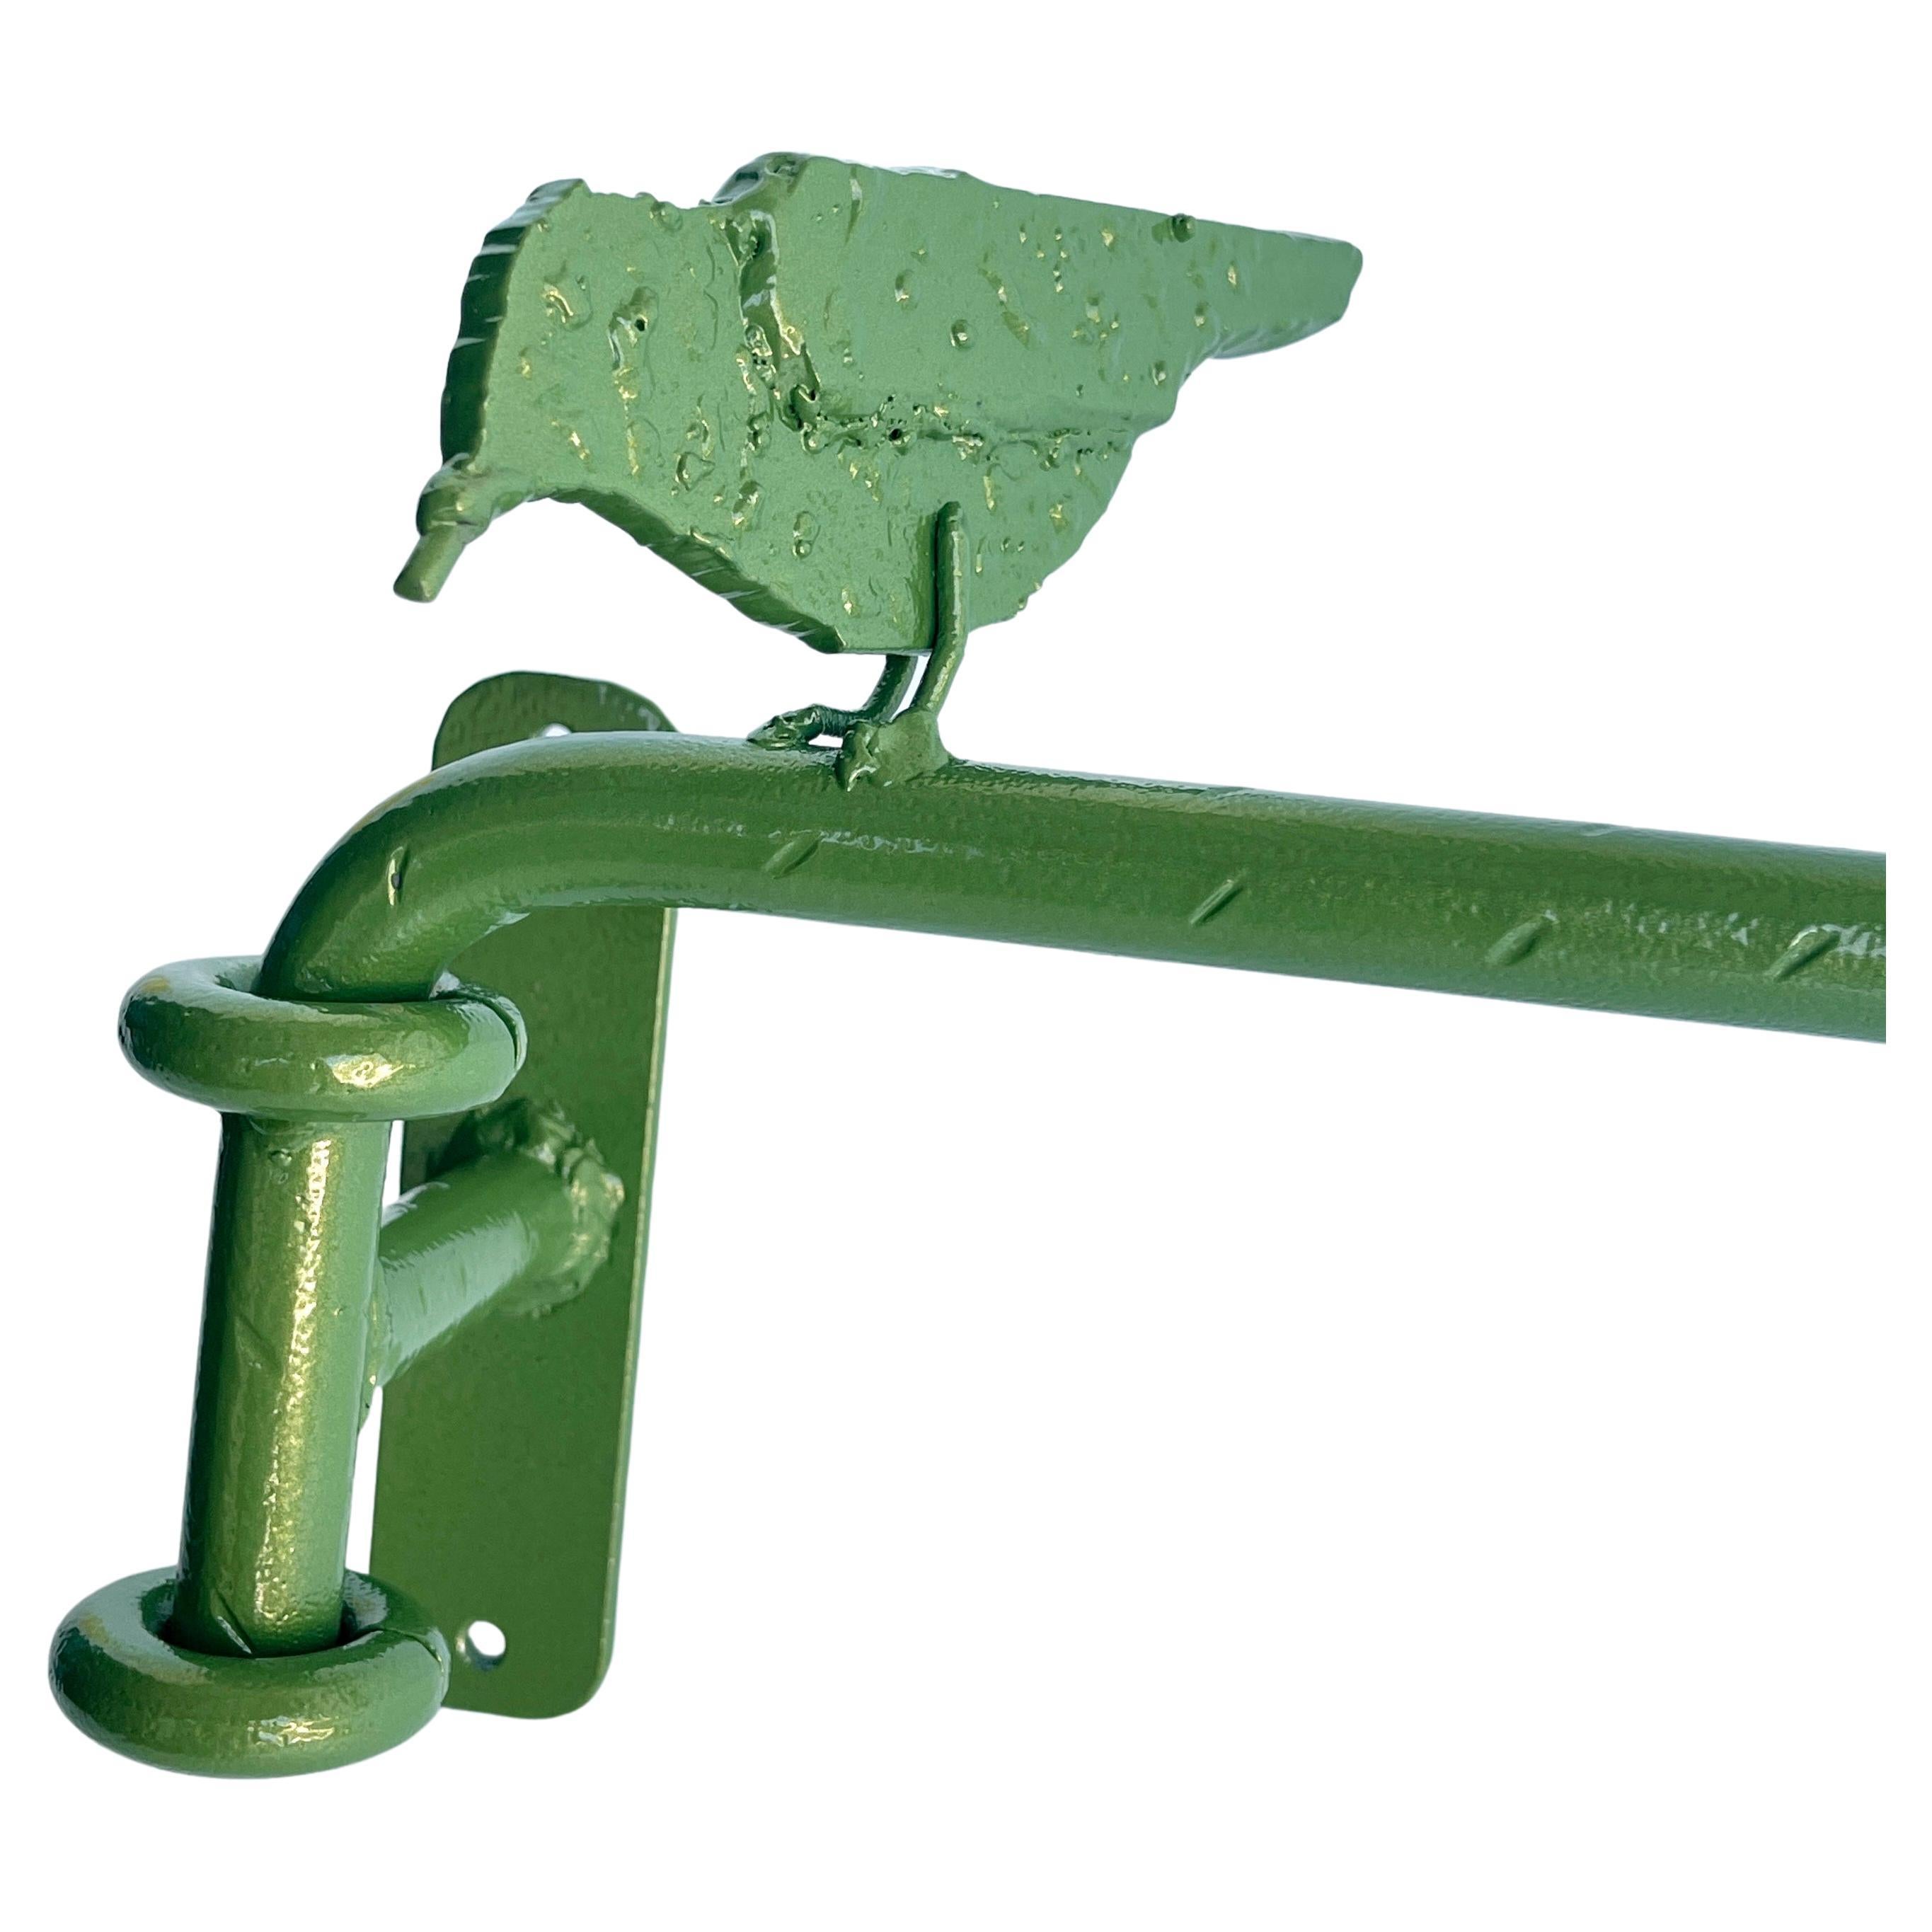 Hand-Crafted Iron Wall Bar Rod With Birds, Green Powder-Coated For Sale 2